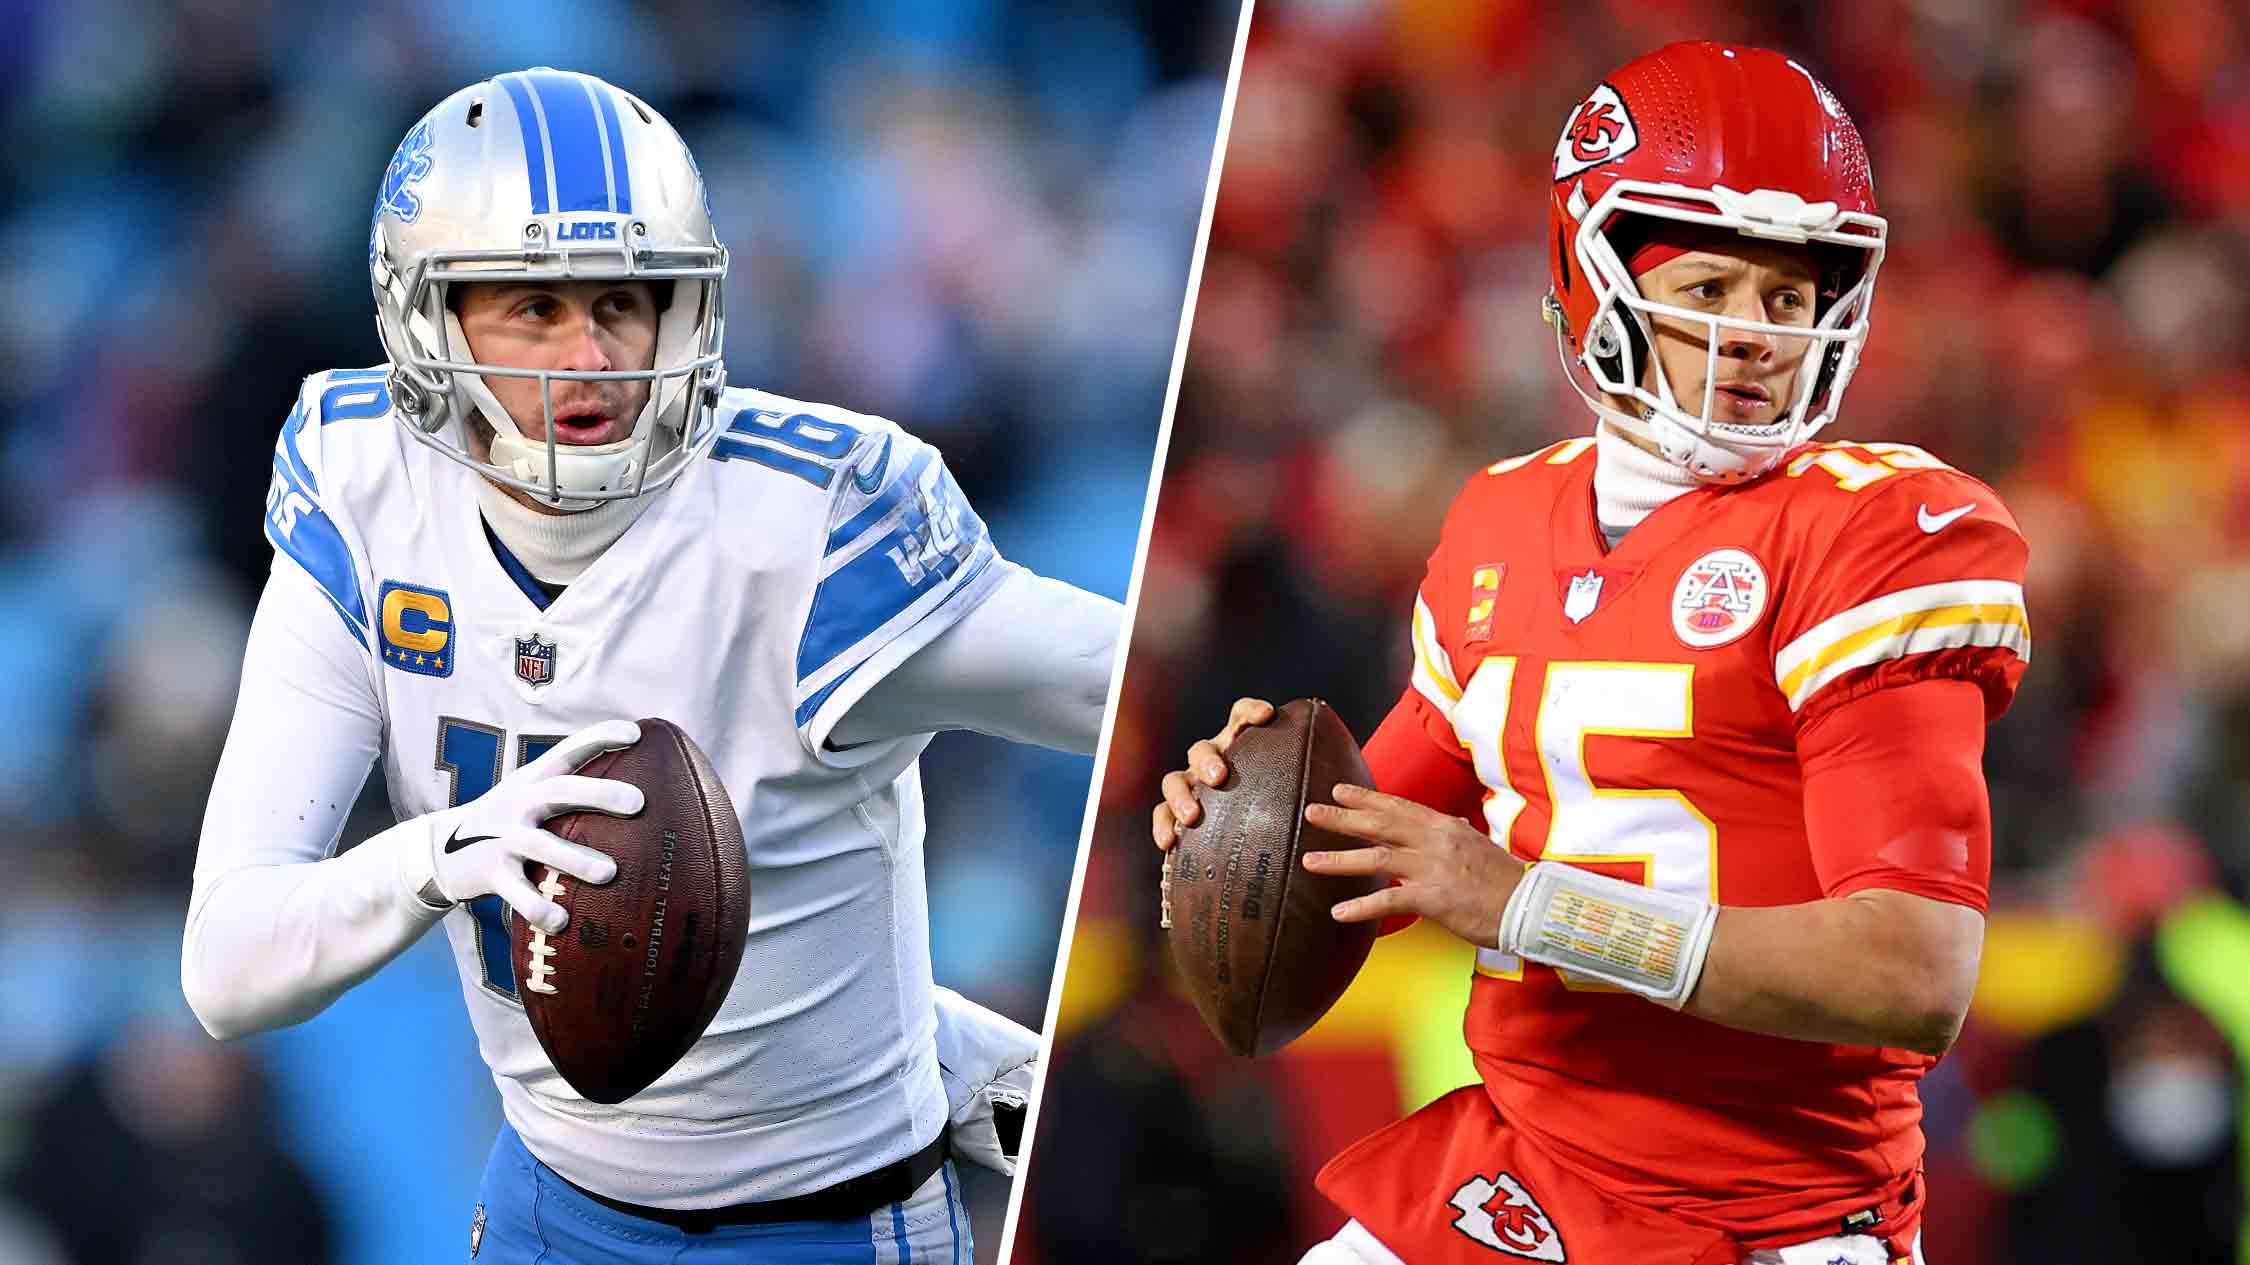 NFL season opener: Start time, TV channel and stream for Chiefs-Lions